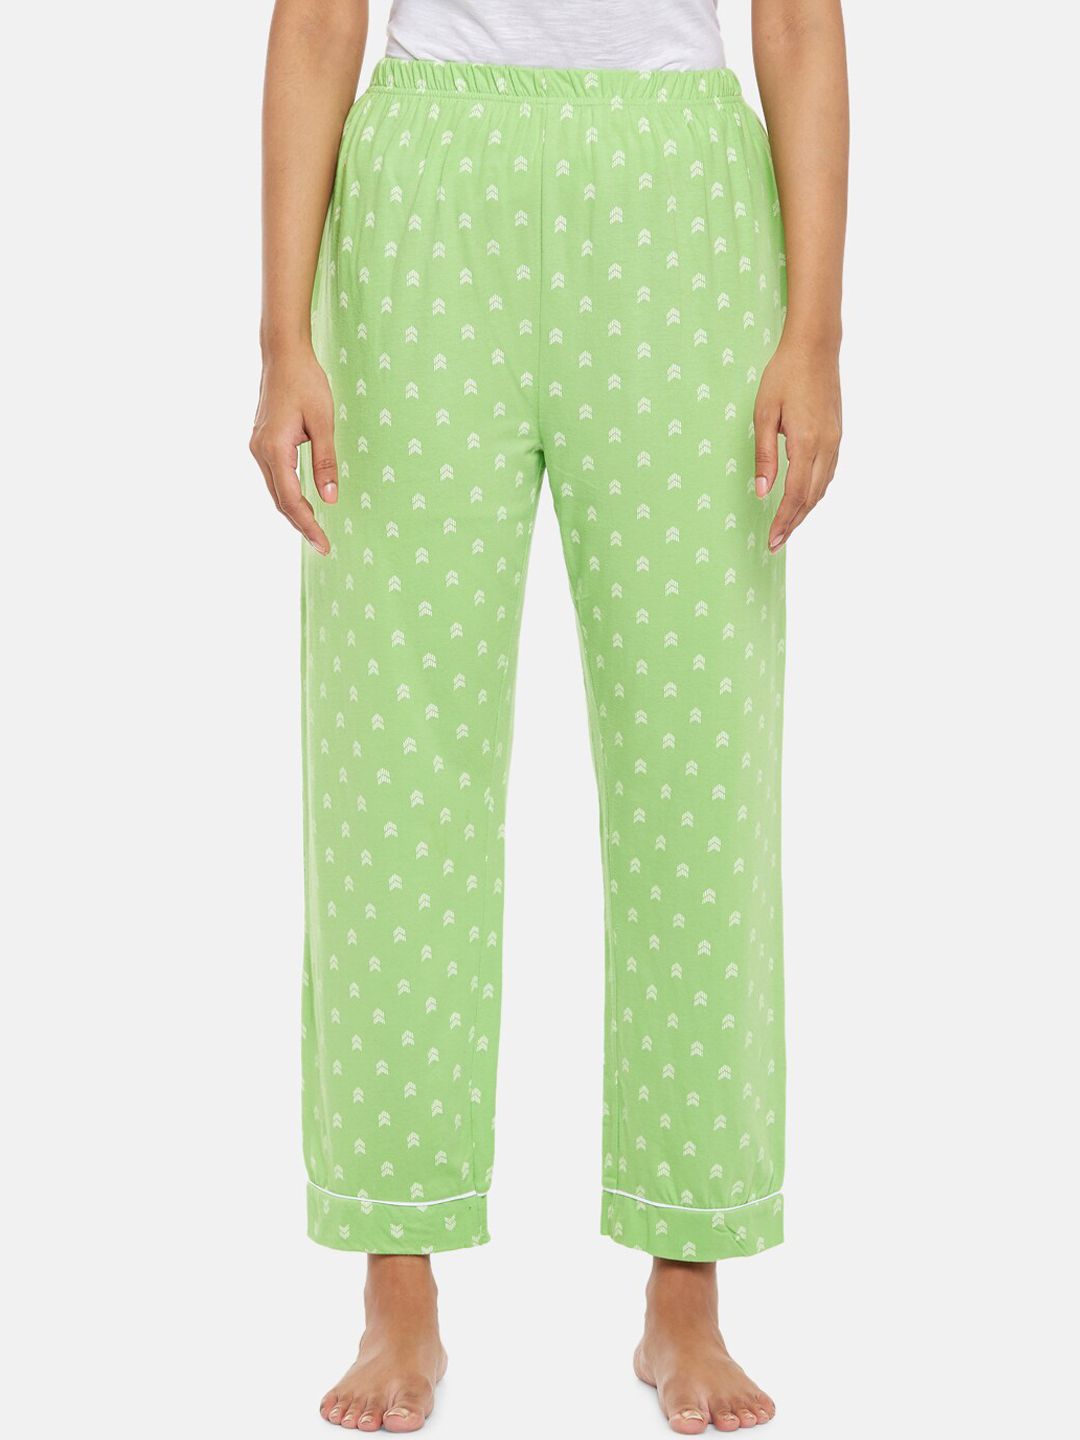 People Womens Lime Green Printed Polka Dots Cotton Pyjama Price in India